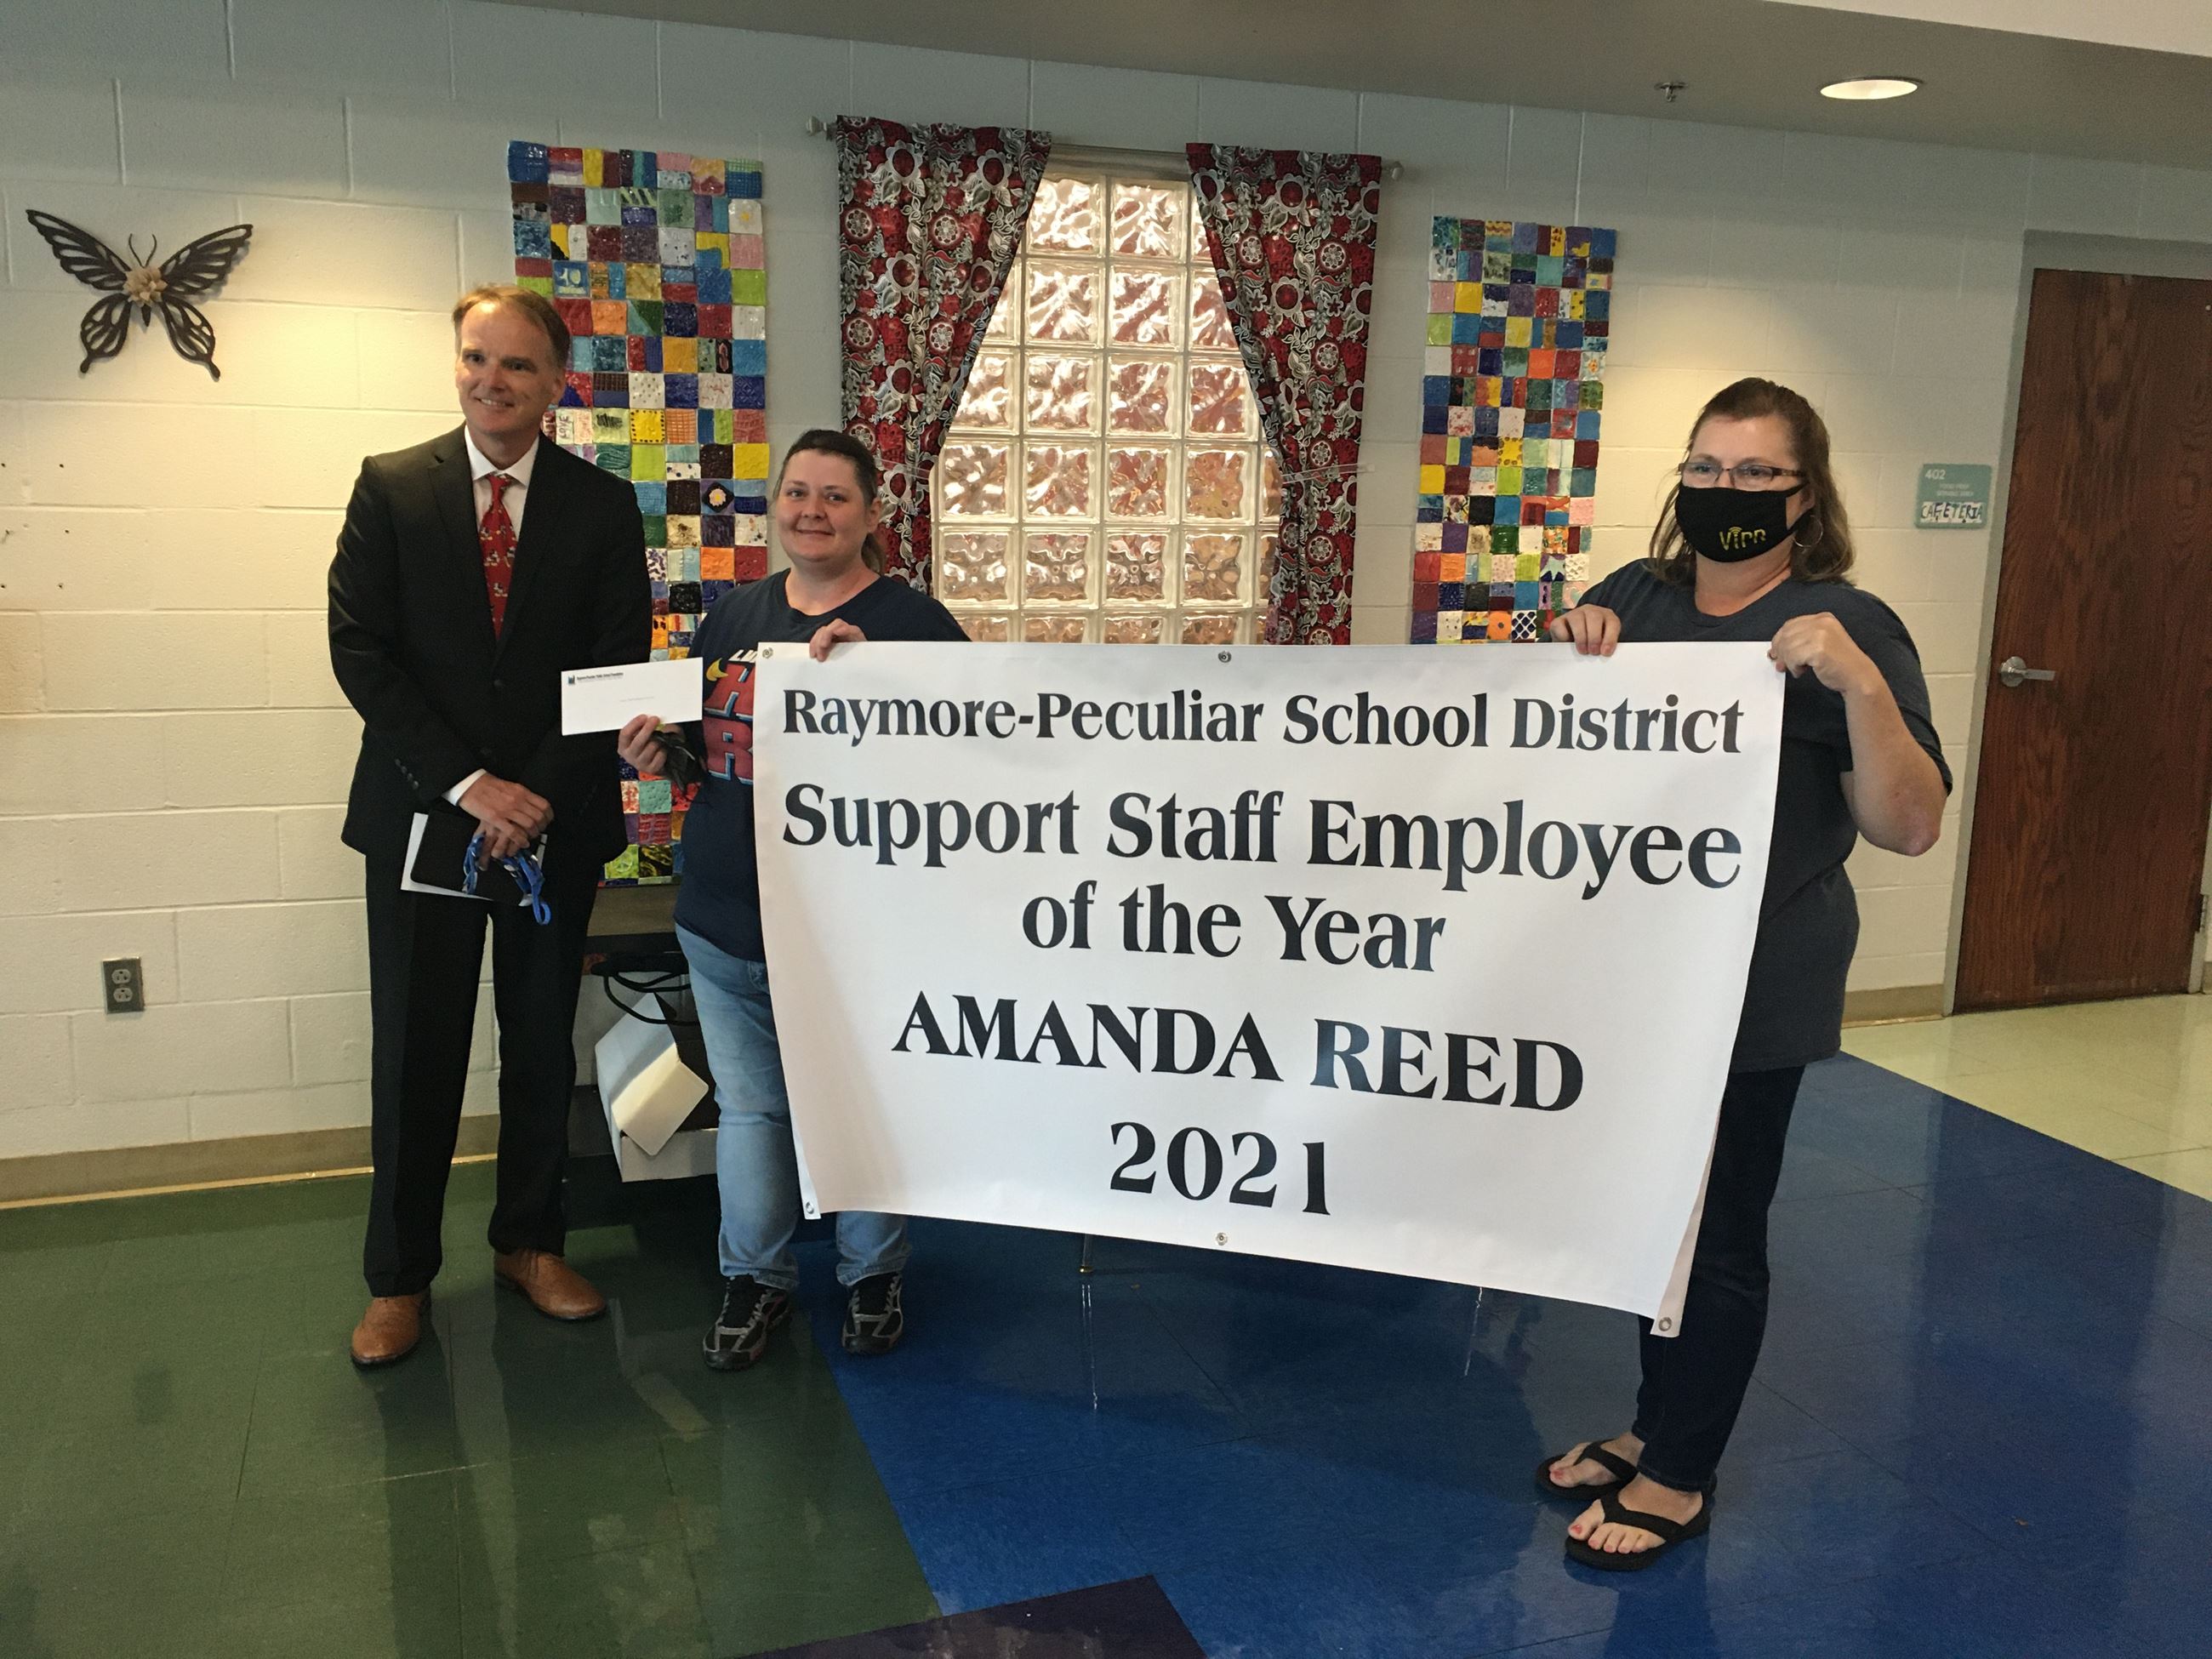 Support Staff Employee of the Year Amanda Reed is pictured with Superintendent Dr. Mike Slagle, at left, and School Board President Ruth Johnson, at right.